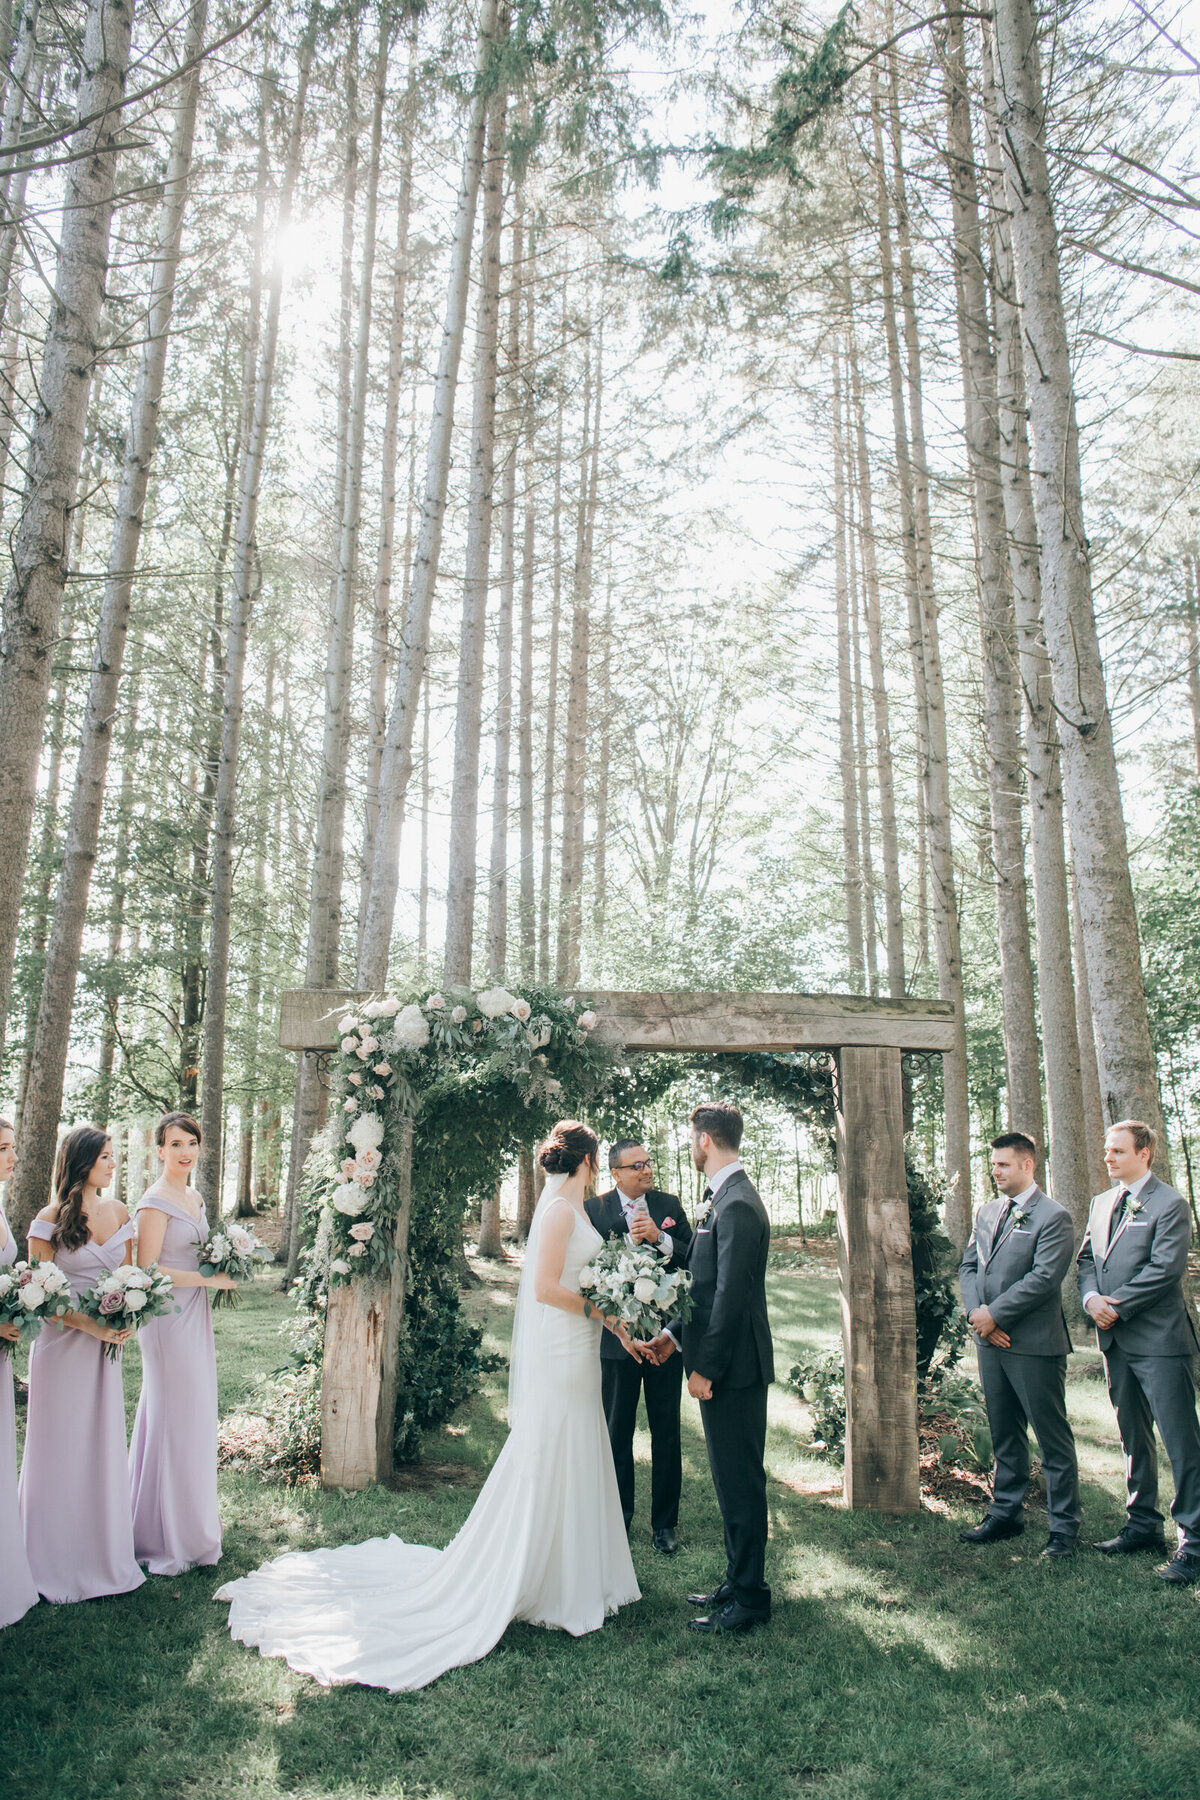 Bride and groom saying their vows in an enchanted forest